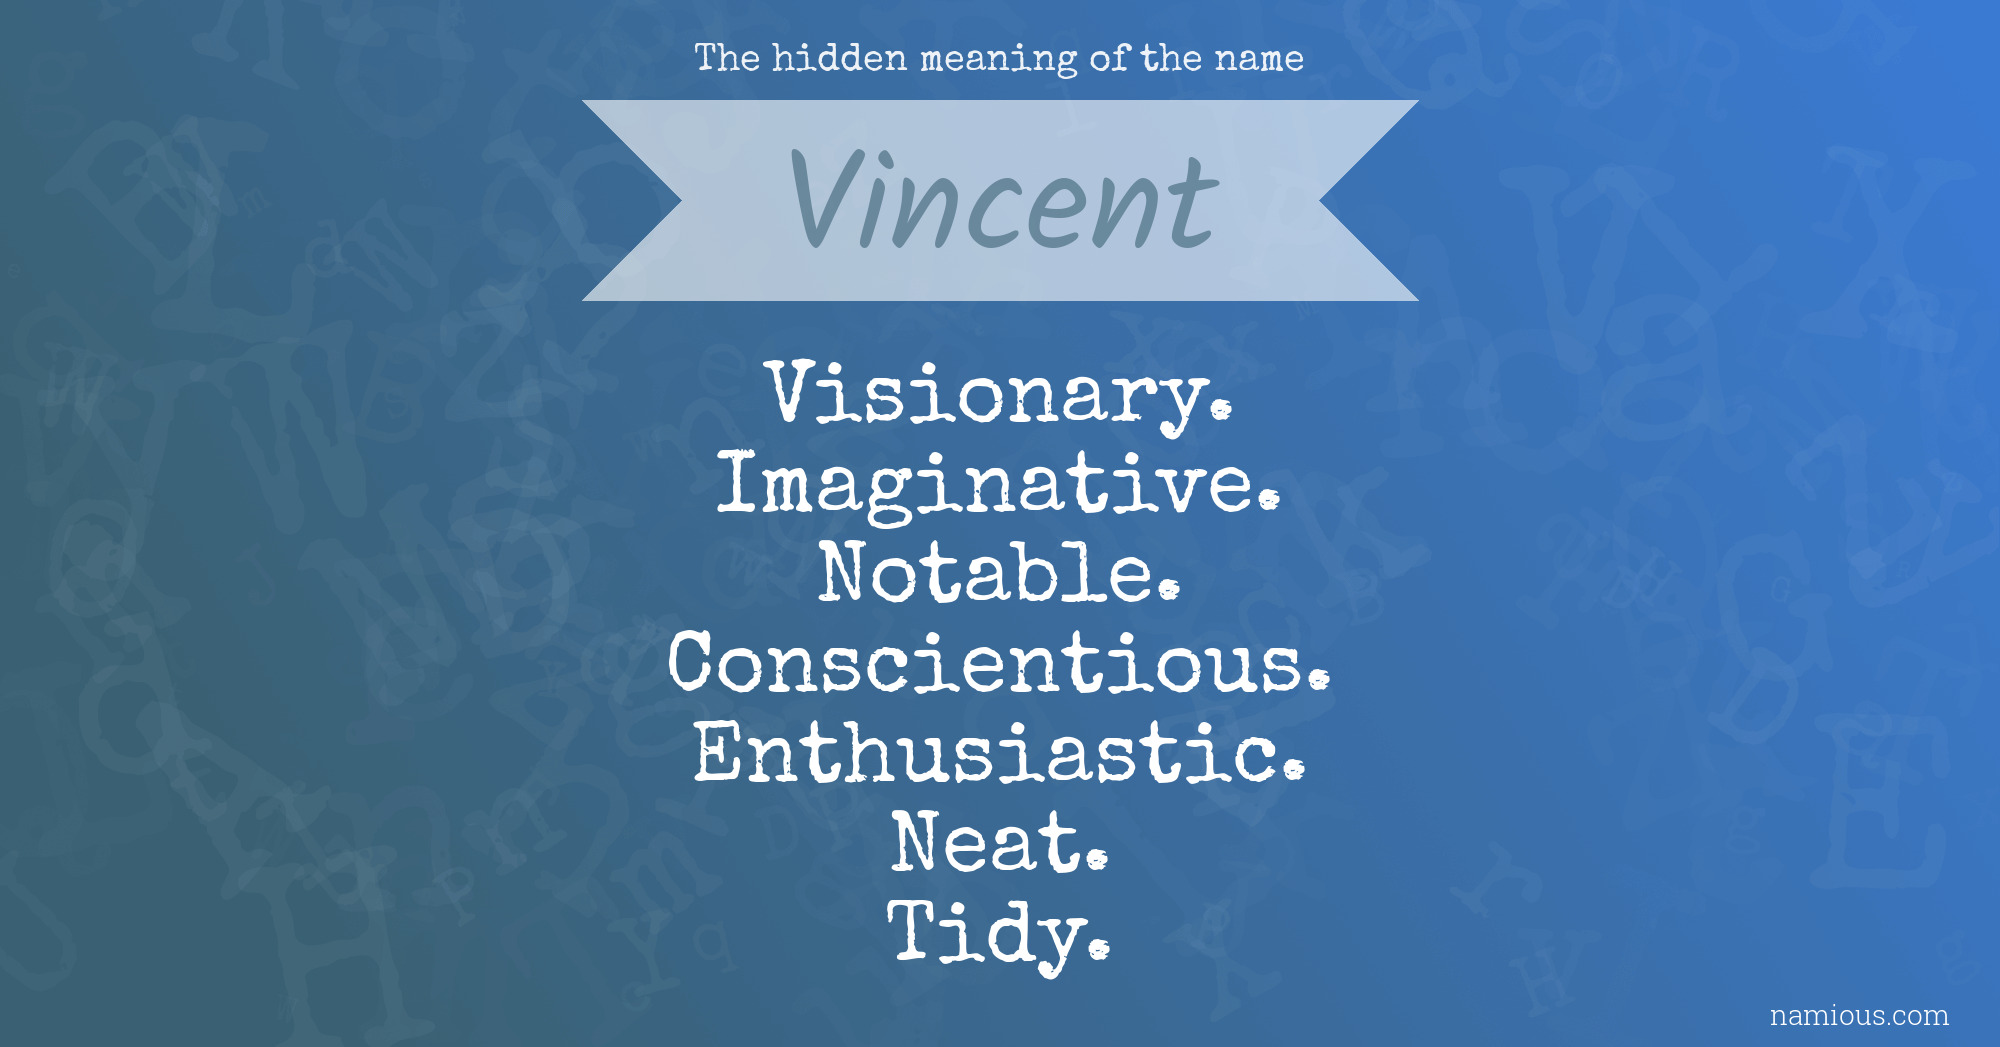 The hidden meaning of the name Vincent